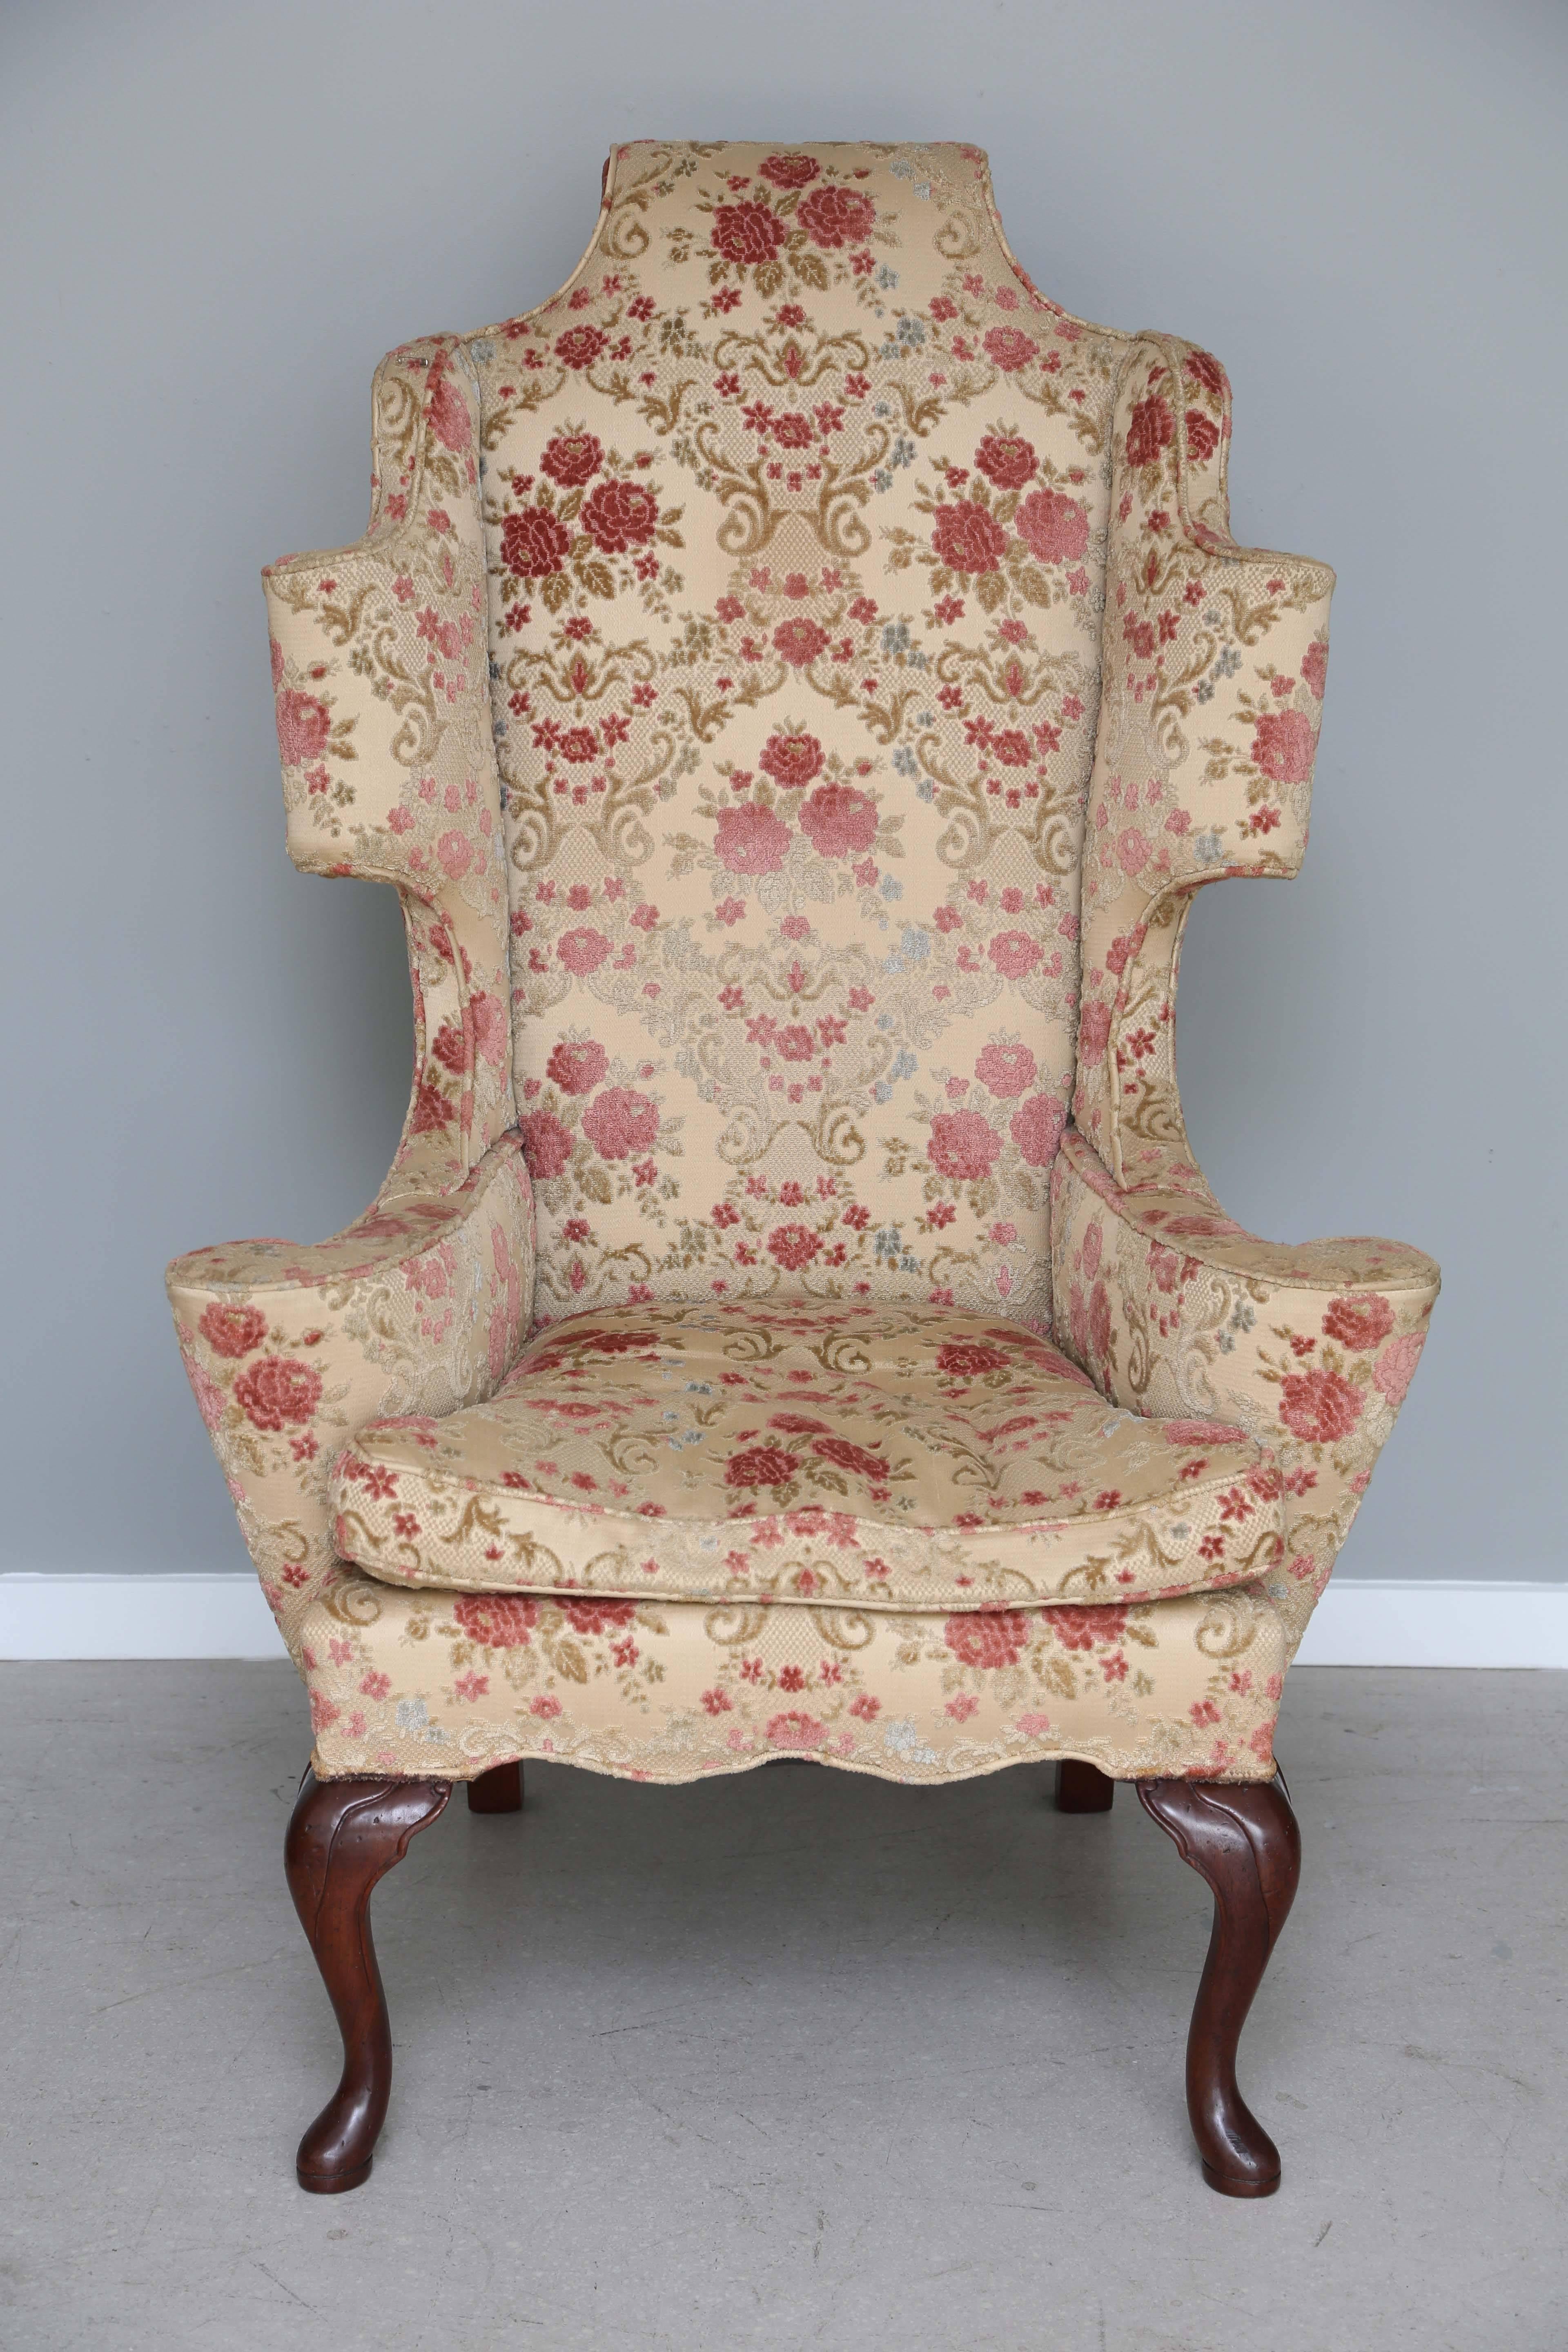 Sculptural Queen Anne style chair with carved Mahogany legs. Dramatic in proportion and attractive from all angles.